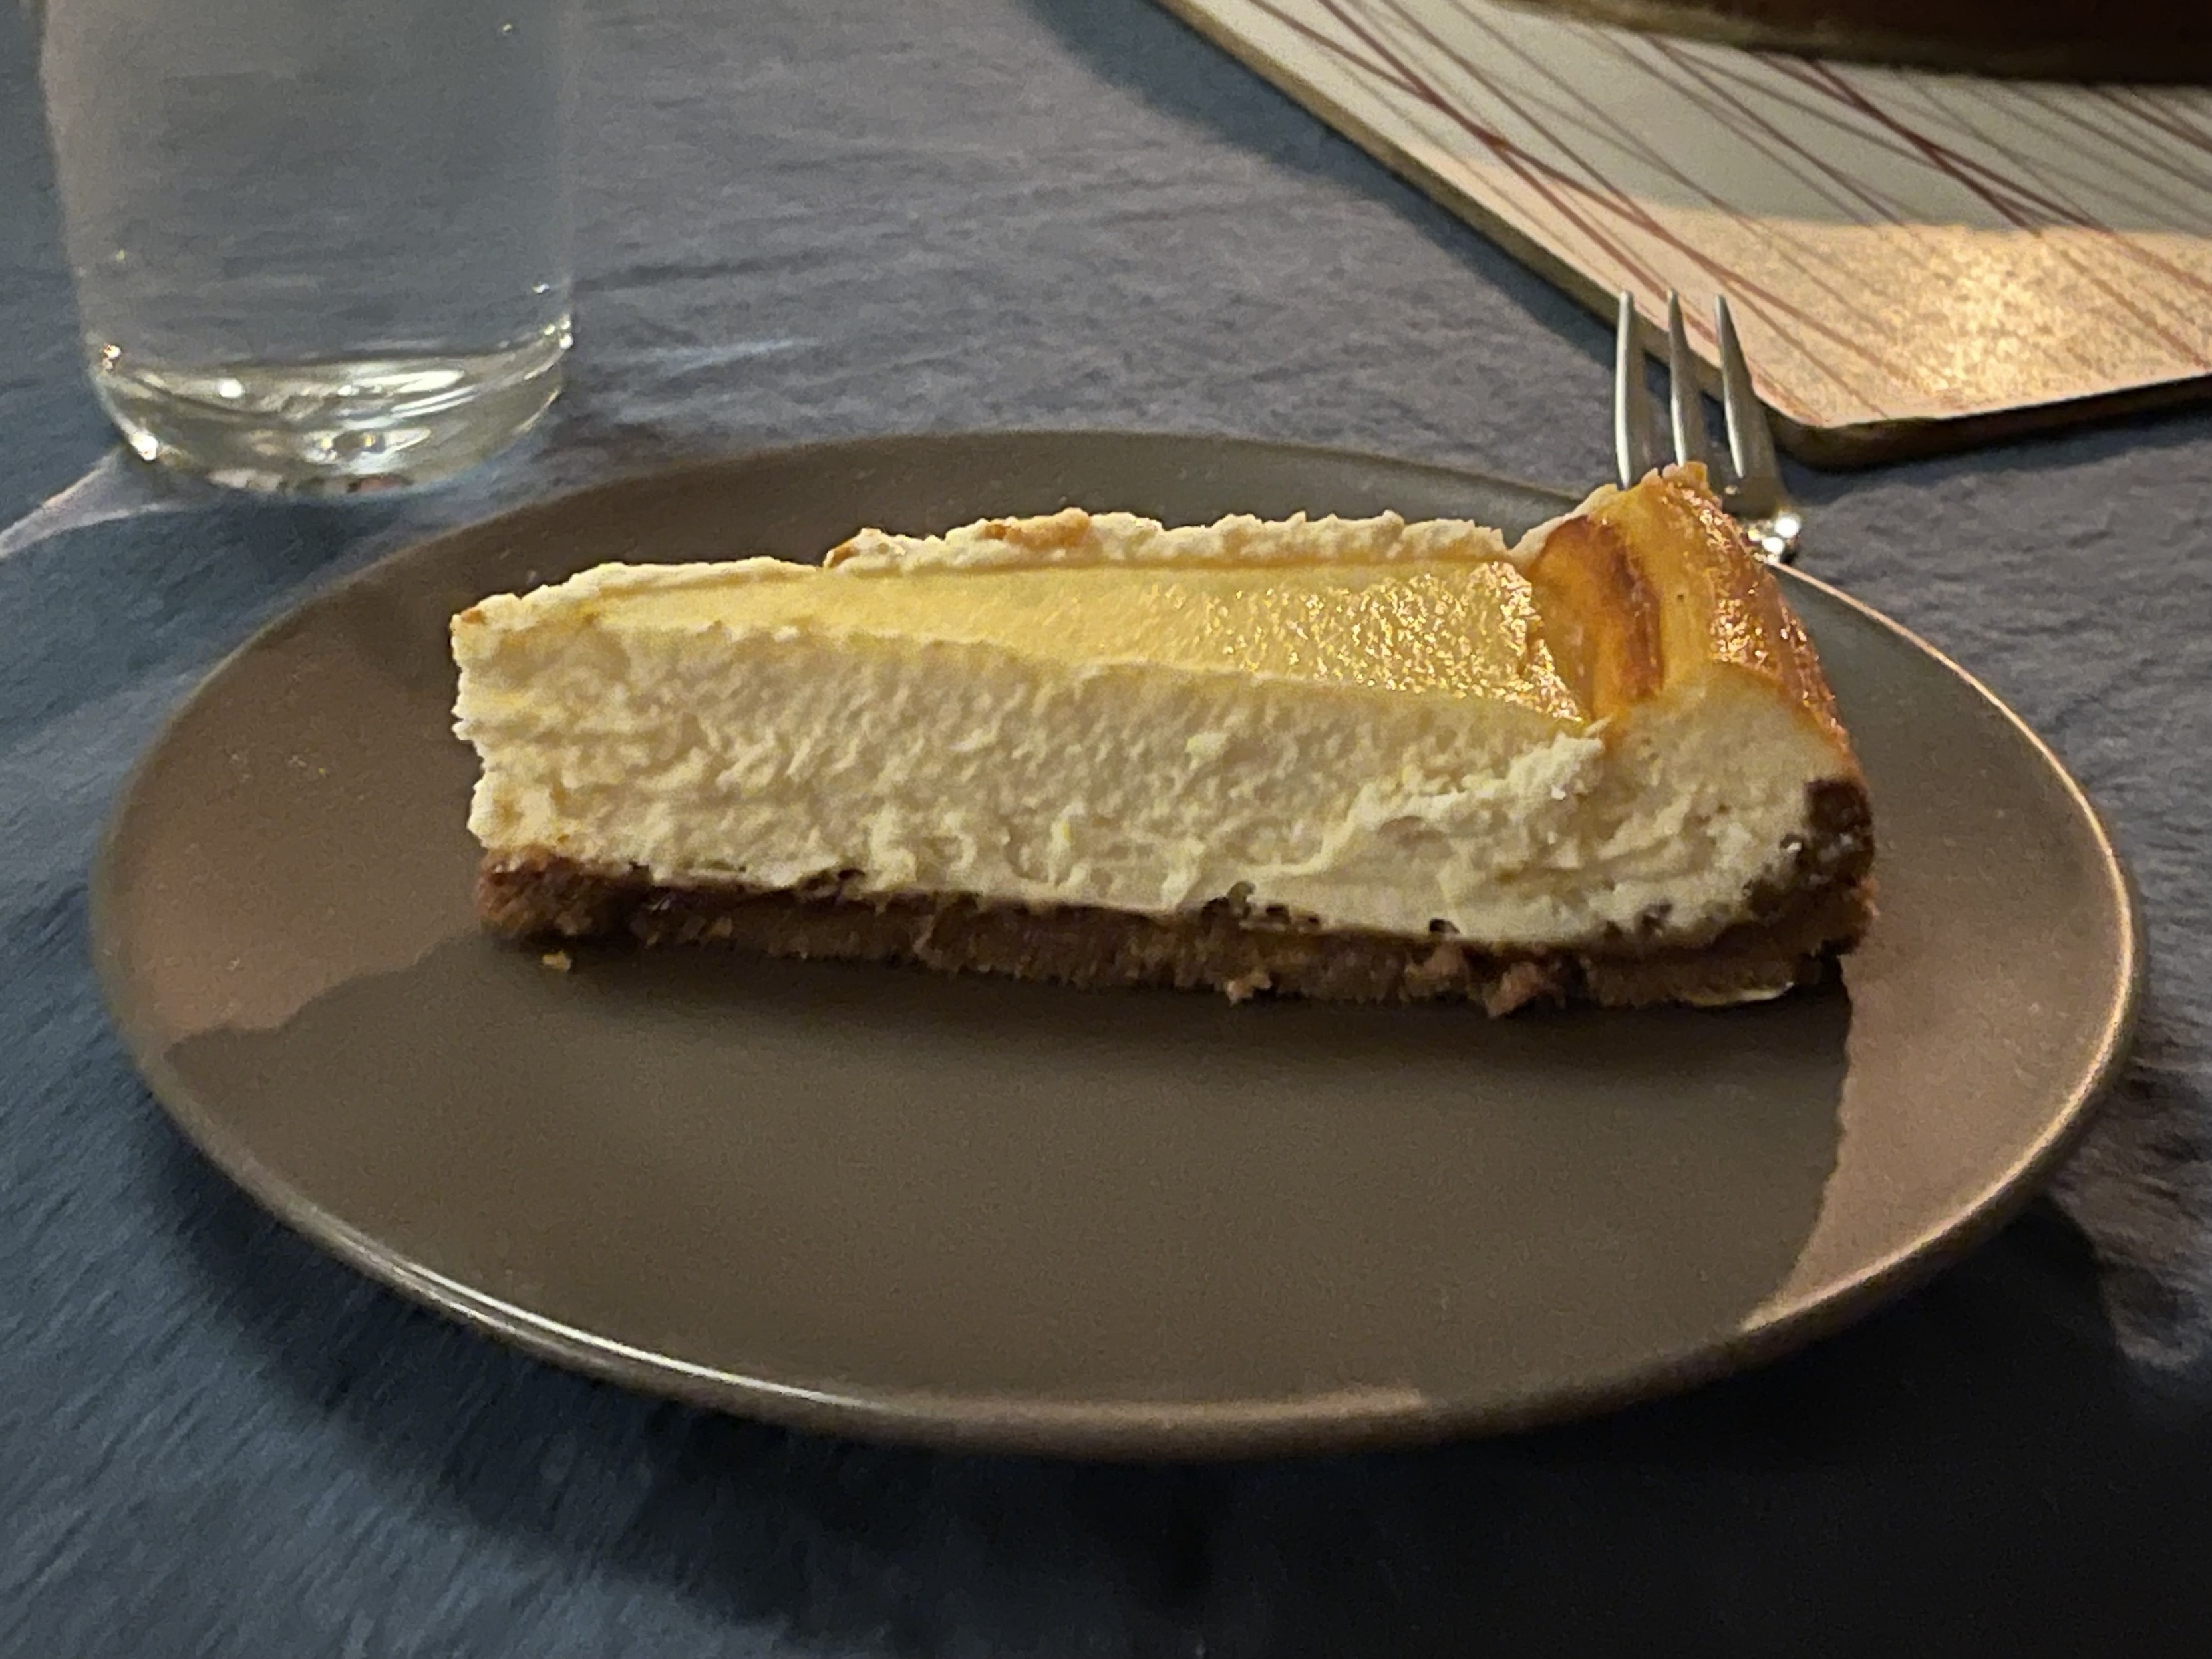 A slice of cheesecake on a brown plate, with a glass of water and a napkin with utensils in the background.